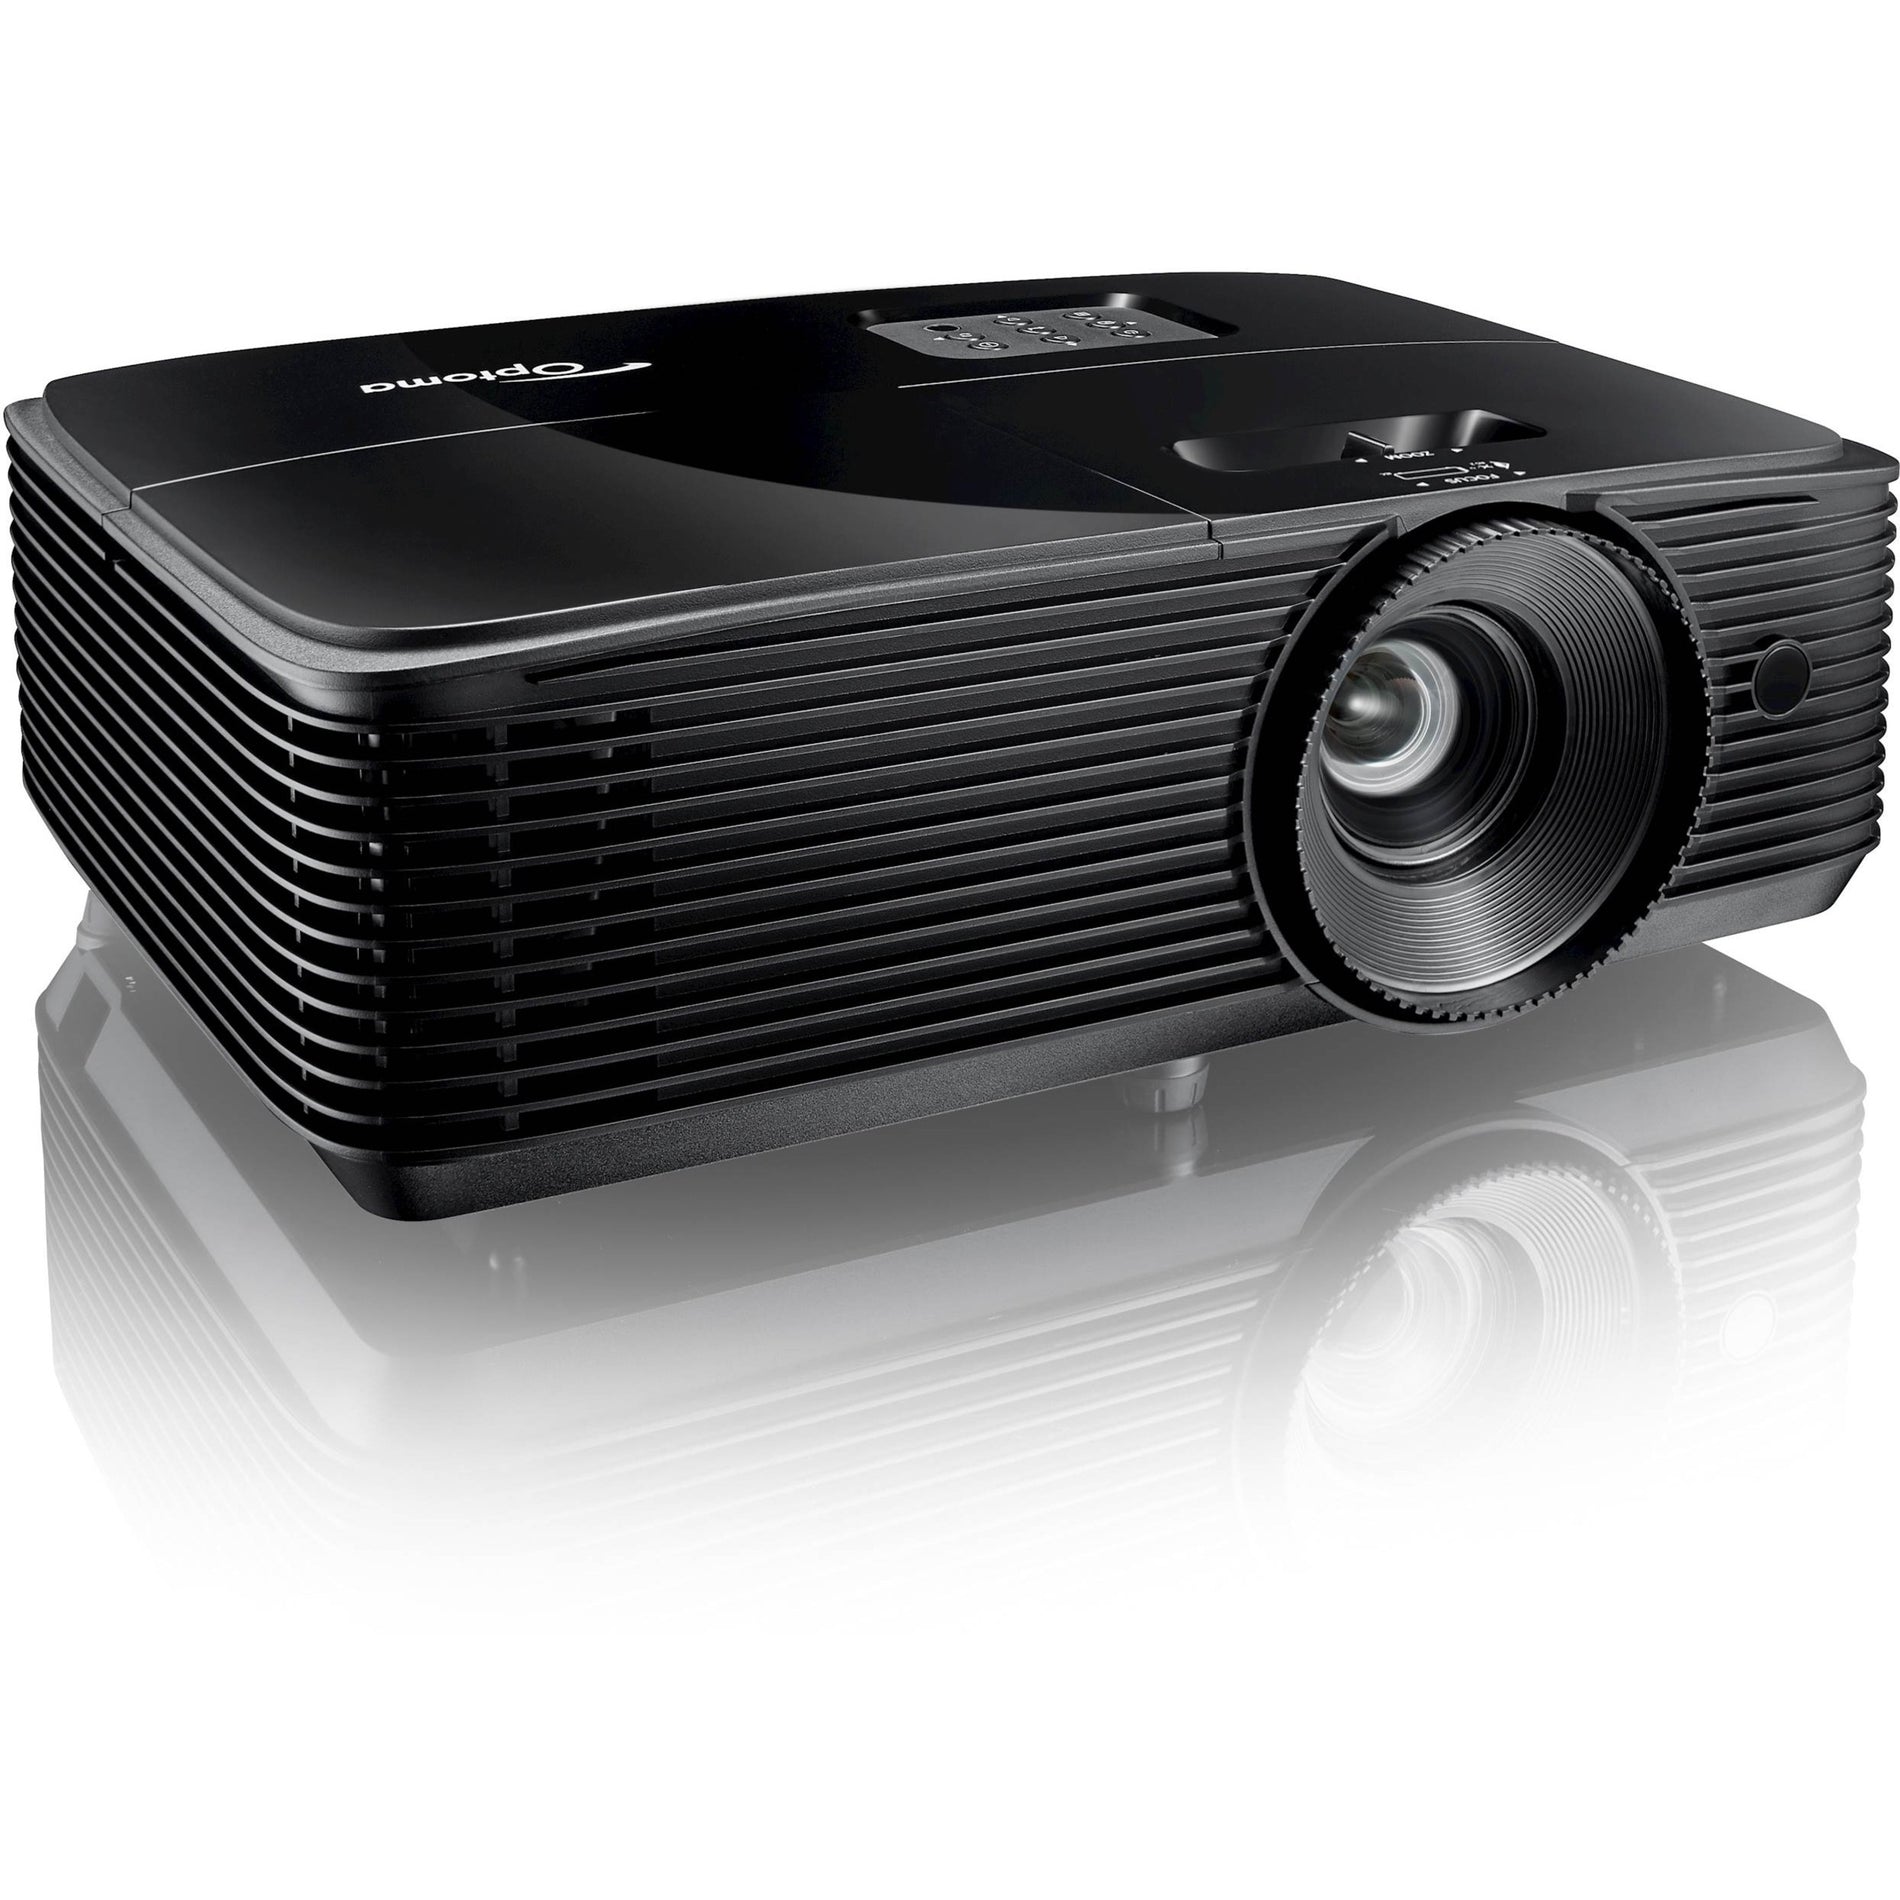 Optoma DH351 DLP Projector, Full HD, 3600 lm, 22,000:1 Contrast Ratio